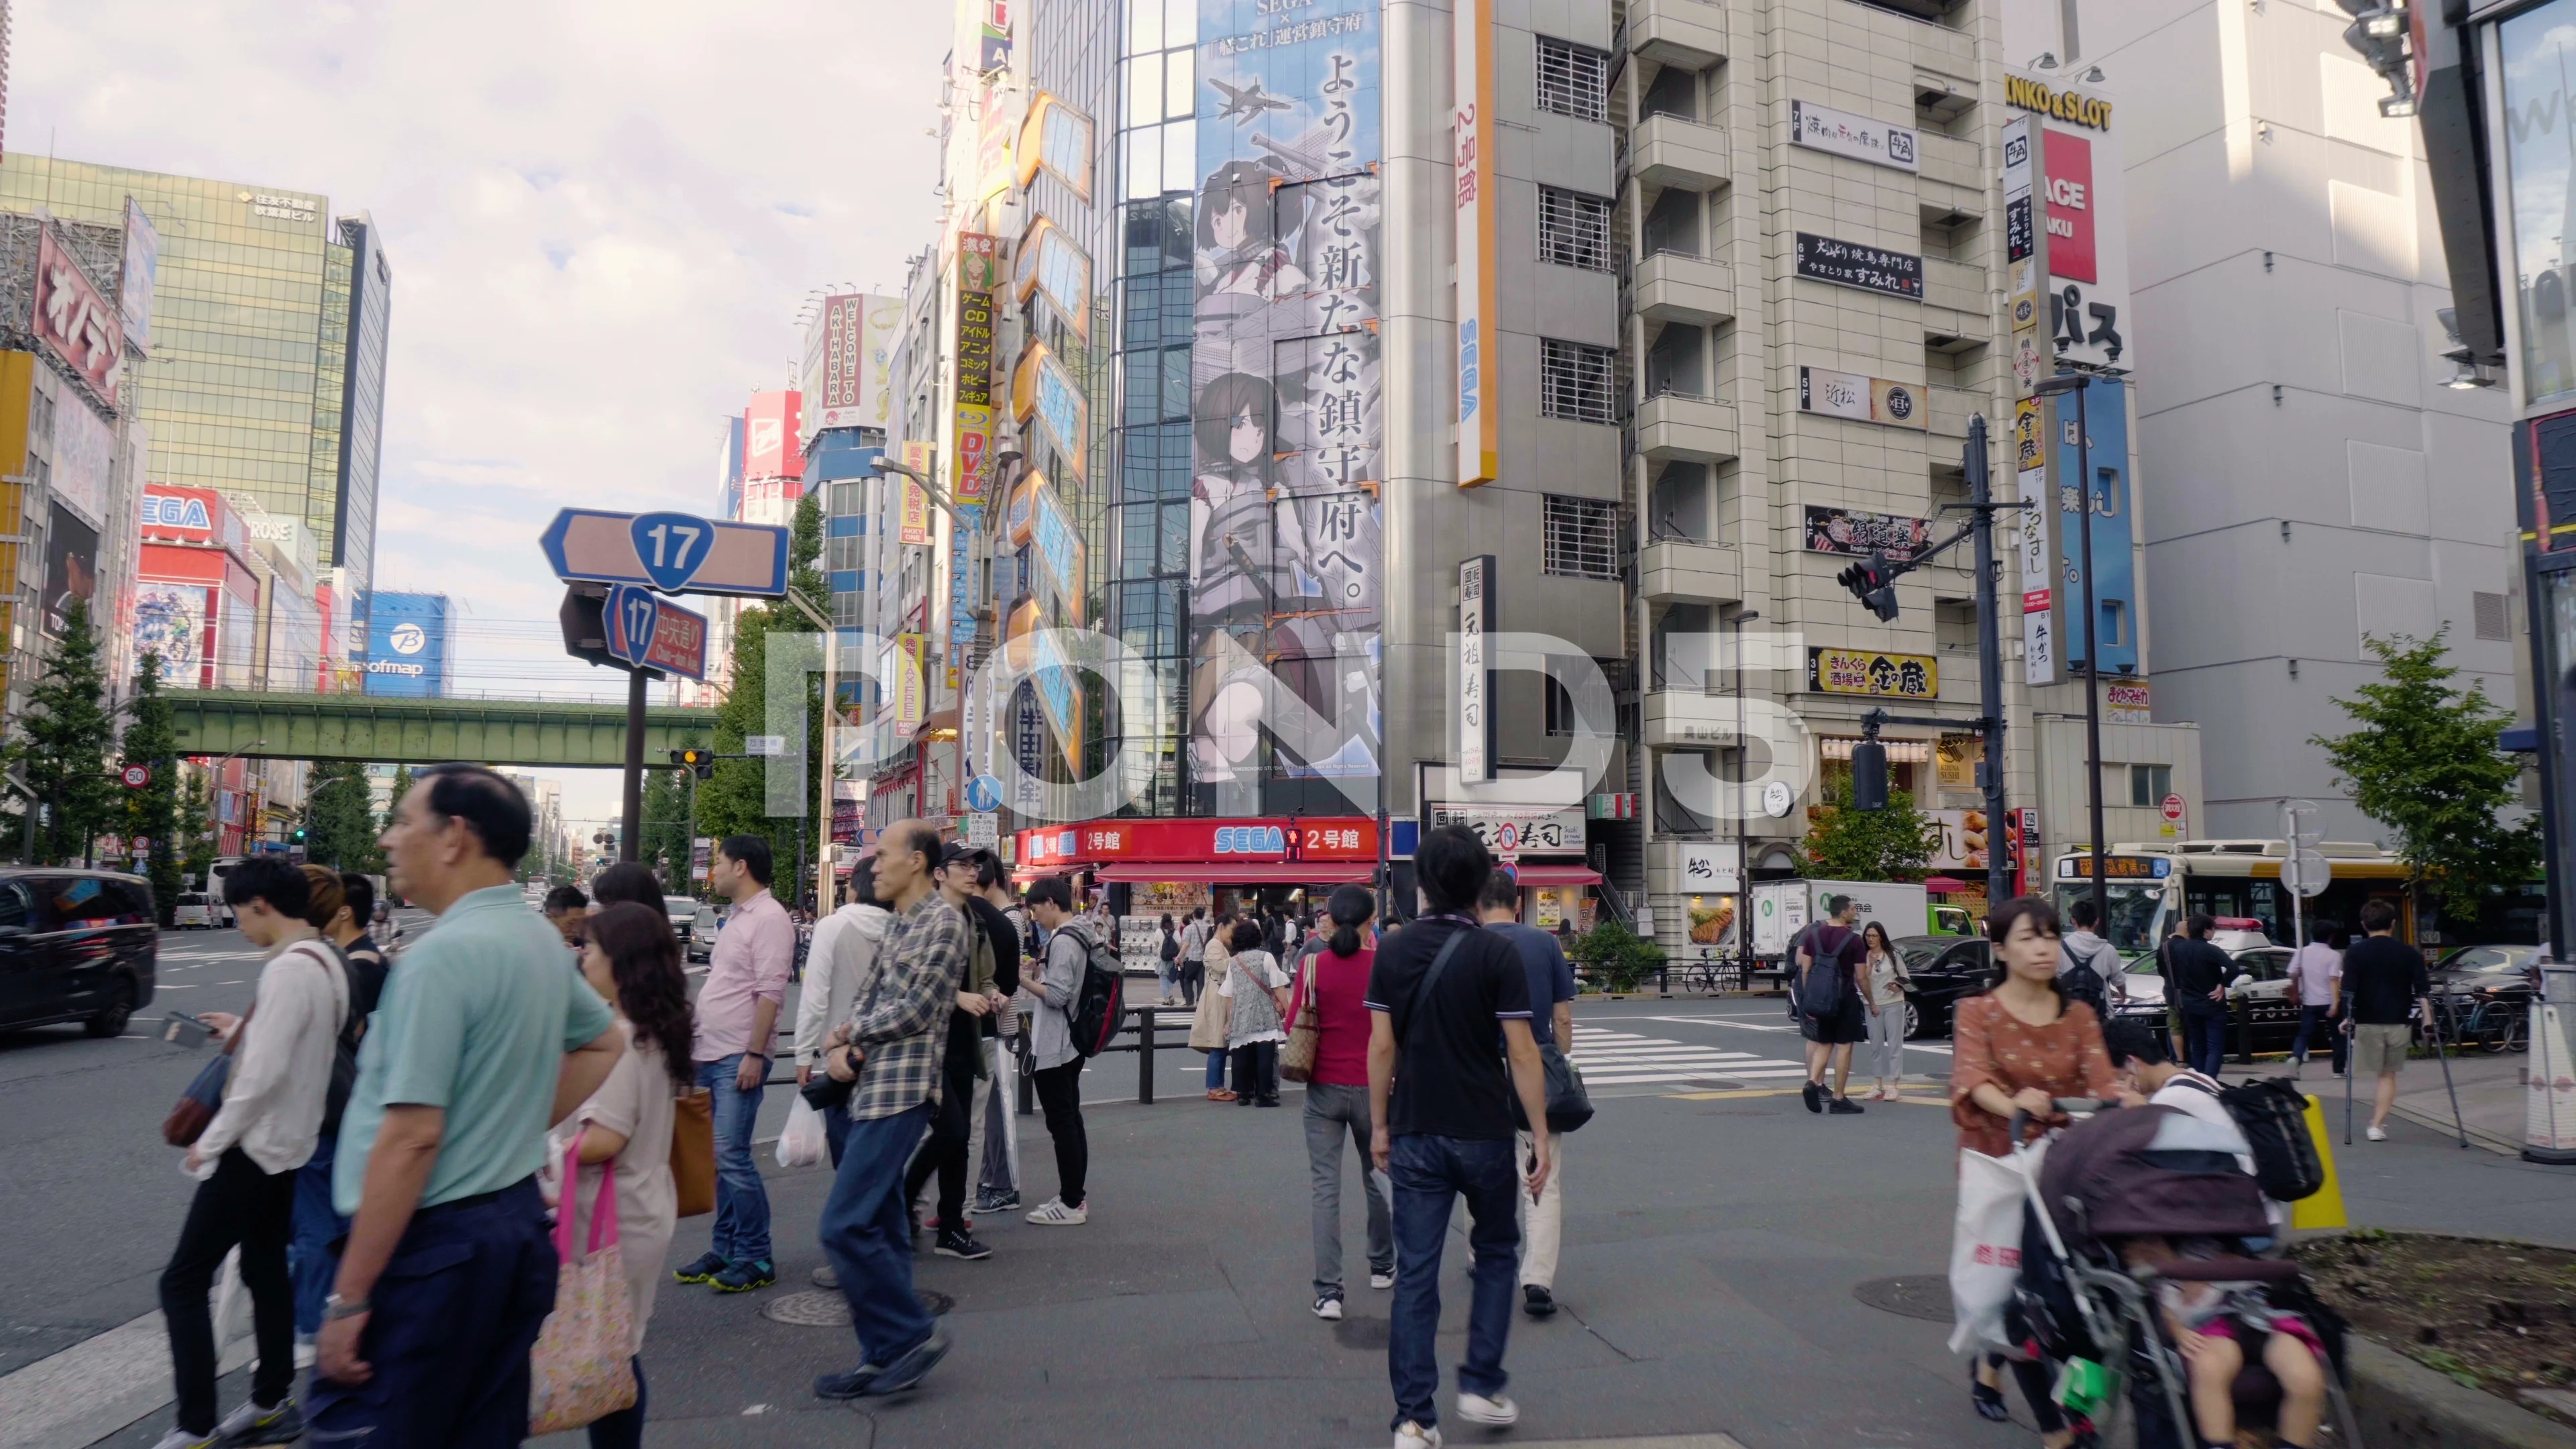 Is Akihabara (the land of anime) safe for young people? - Quora